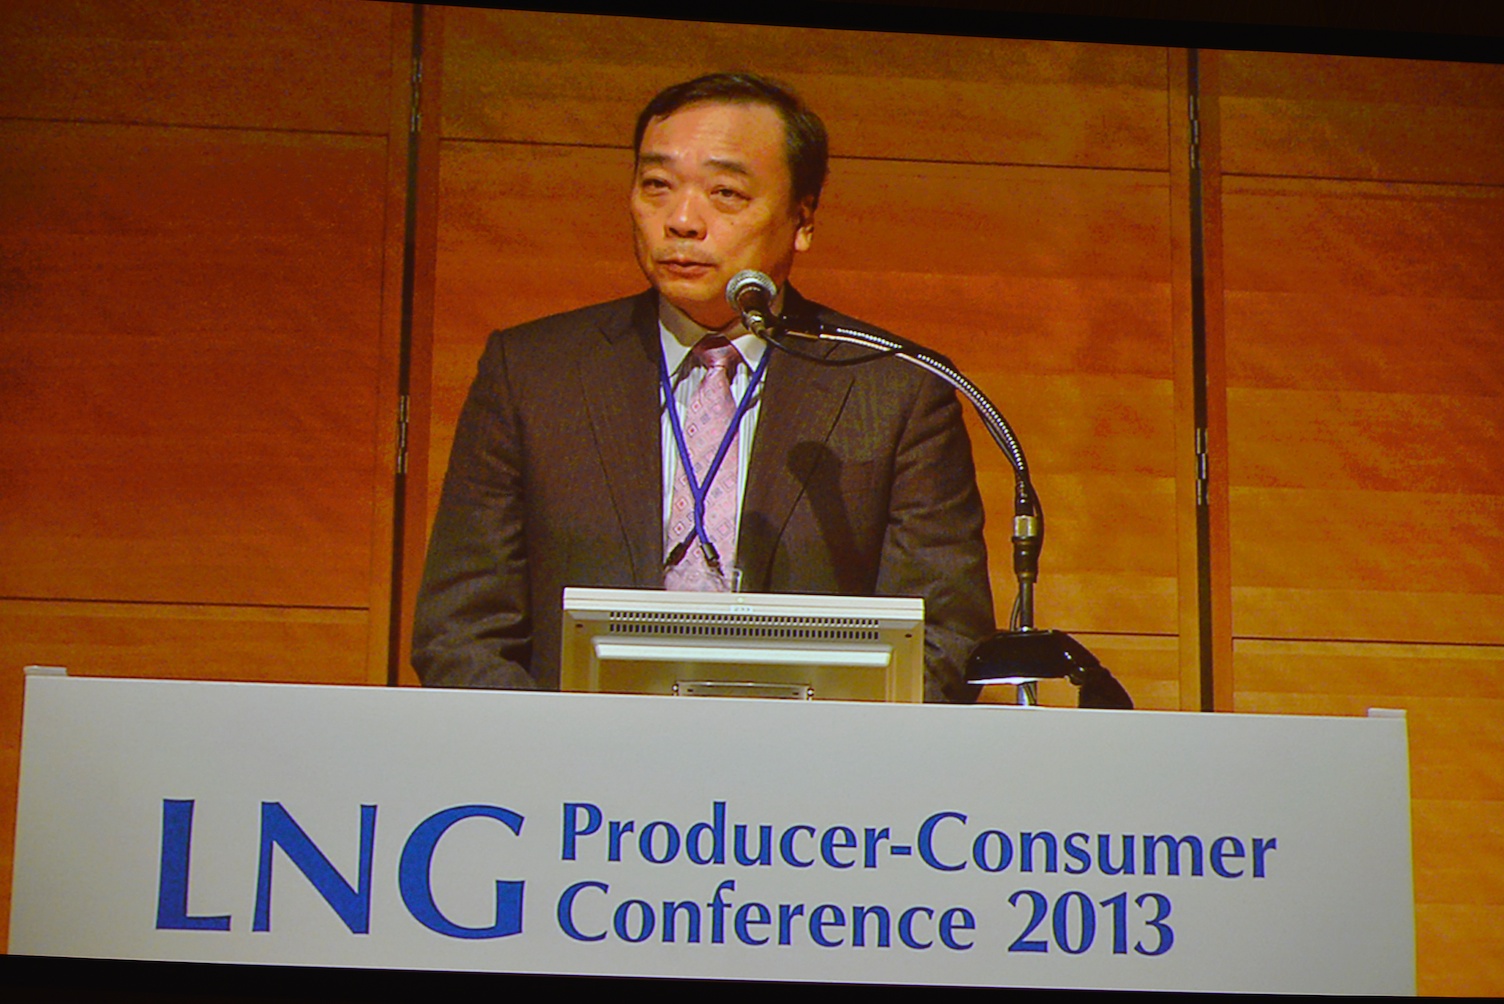 LNG Producer Consumer Conference 2013  (2)  09 10 2013